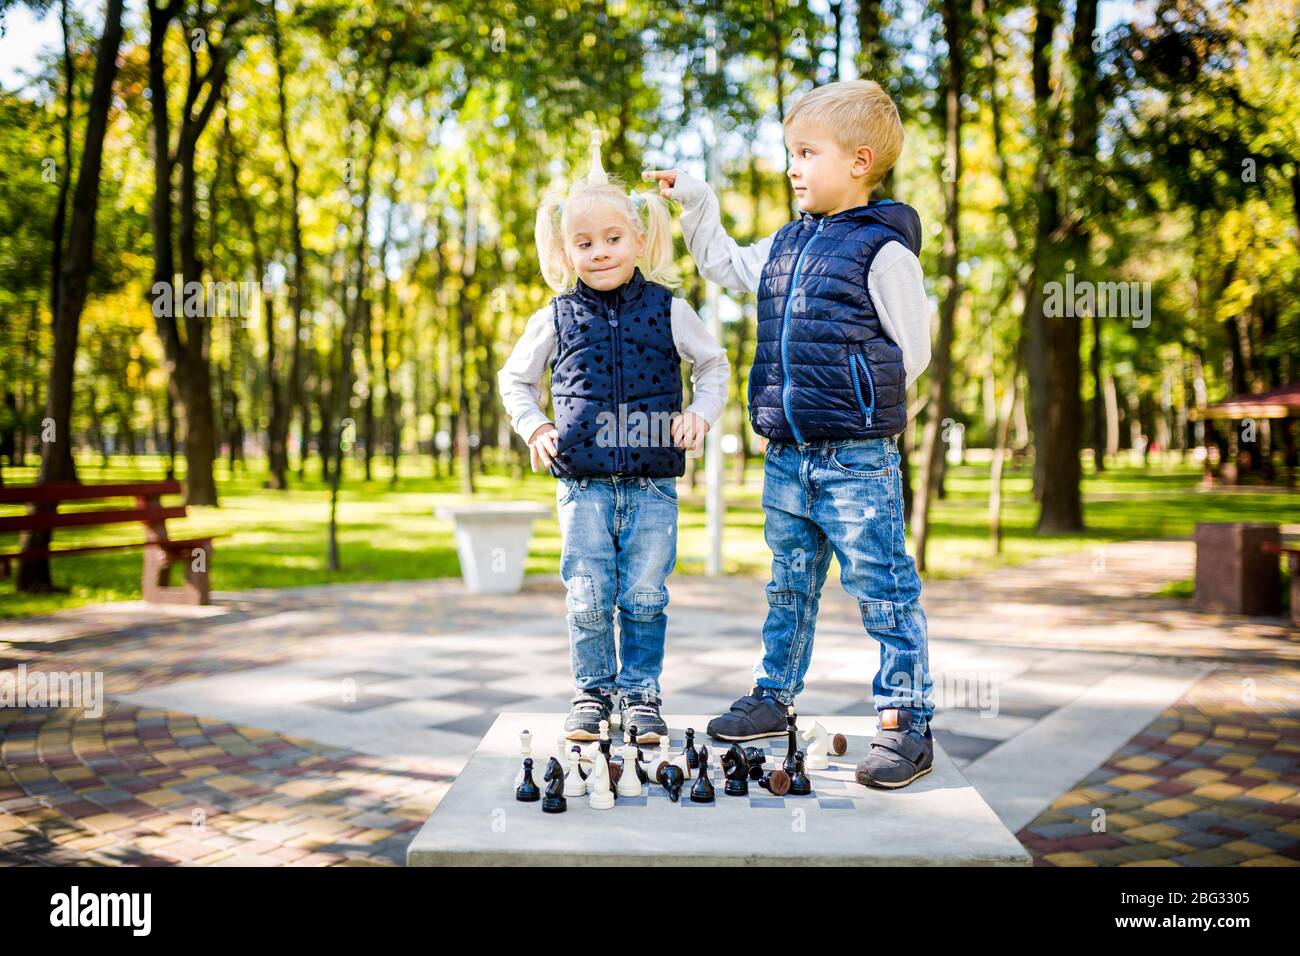 Funny little brother and sister of Caucasian ethnicity play on a public chess venue in a city park. Children frolic and indulge instead of studying Stock Photo